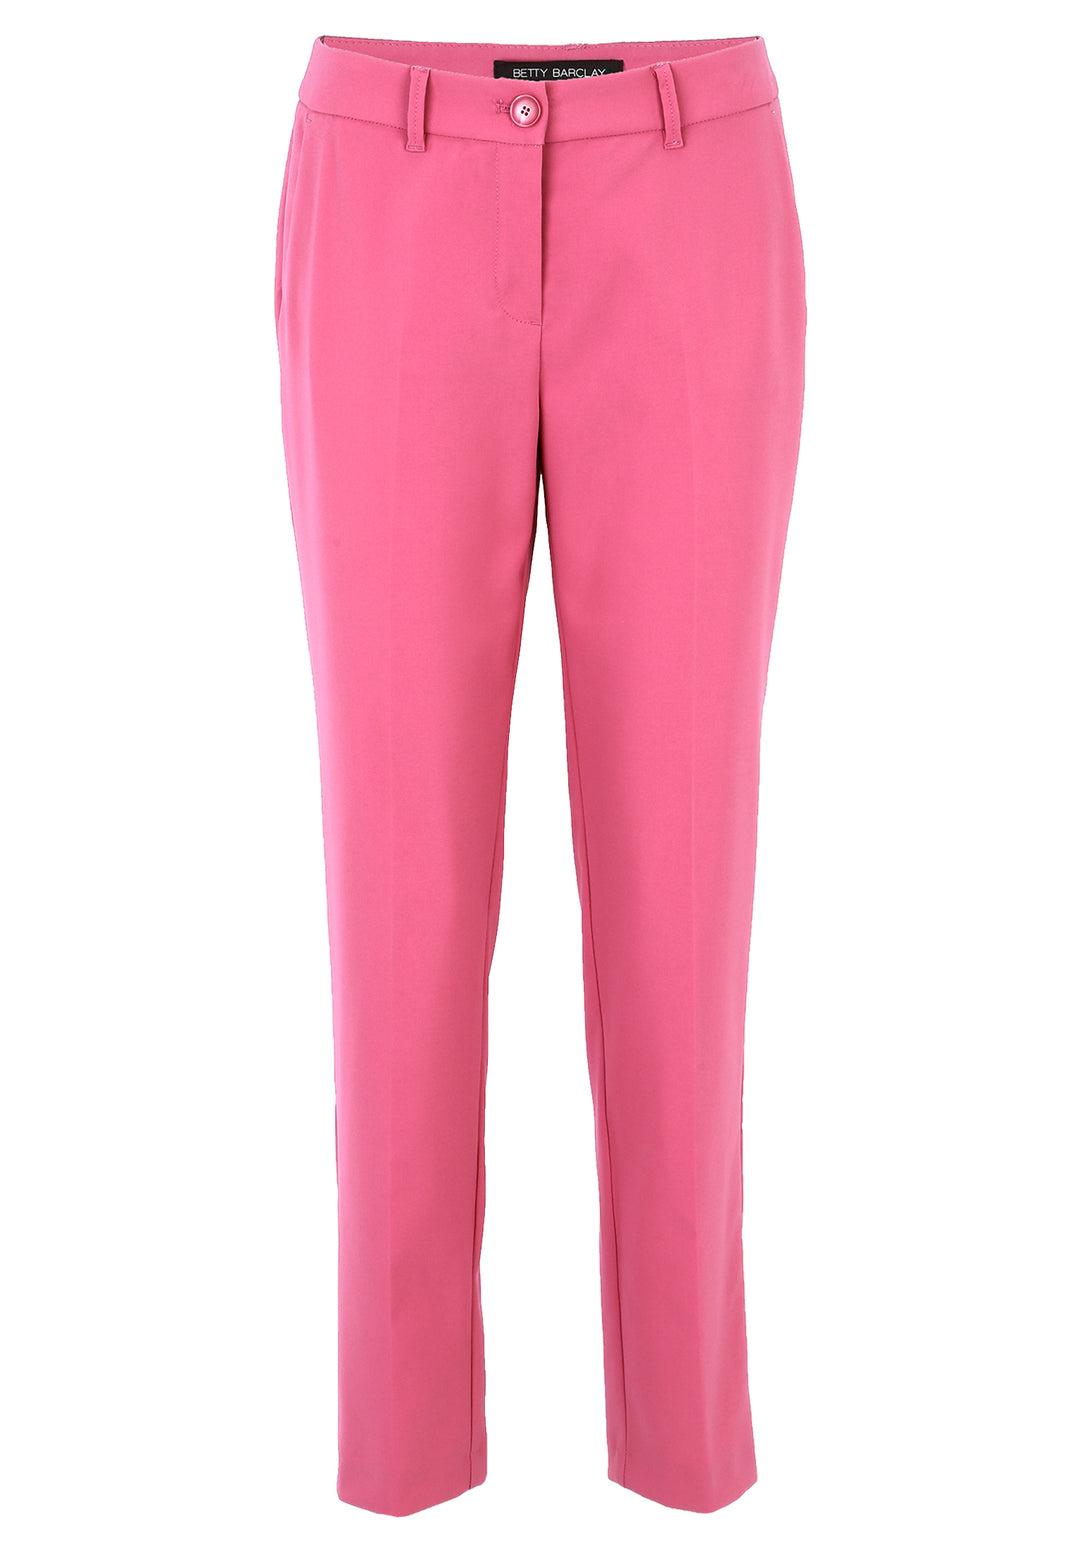 Betty Barclay 6675 1080 Classic 7/8 Length Trouser Pink 3